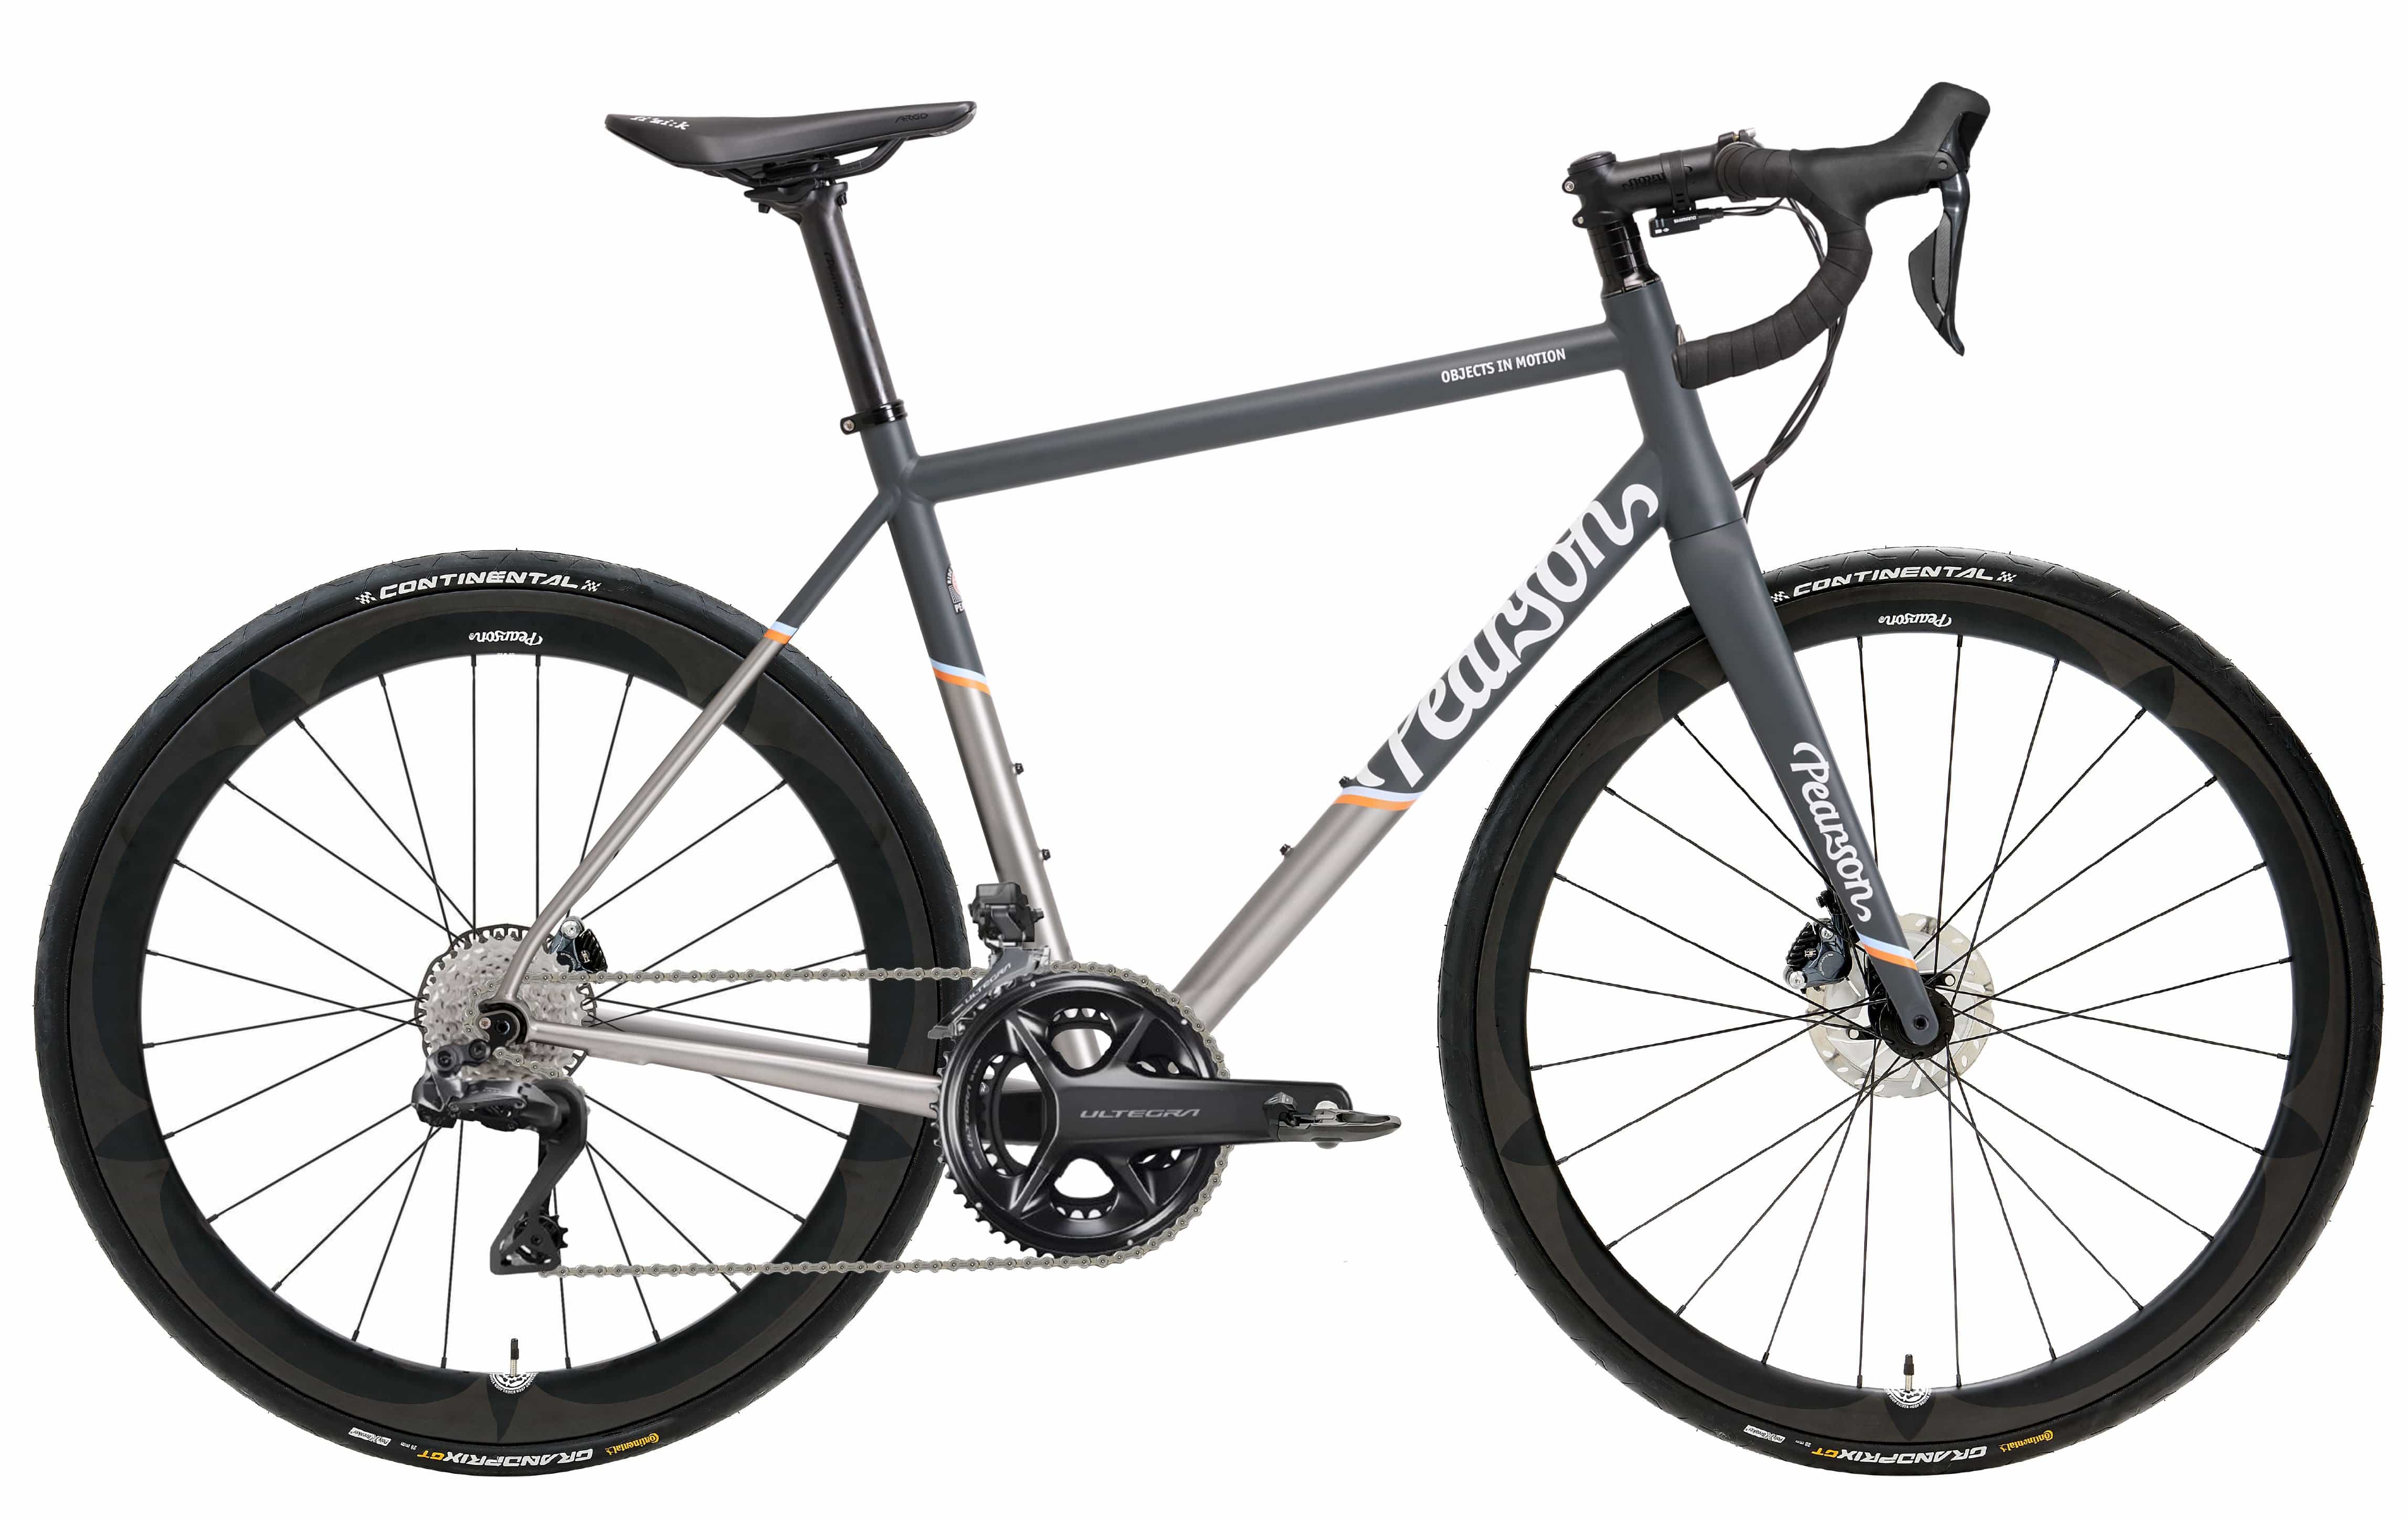 Pcs  Objects In Motion - Titanium Road Bike  Small / Grey / Shimano Ultegra R8170 12 Speed Di2 - Hoopdriver Cut And Thrust Carbon Wheels